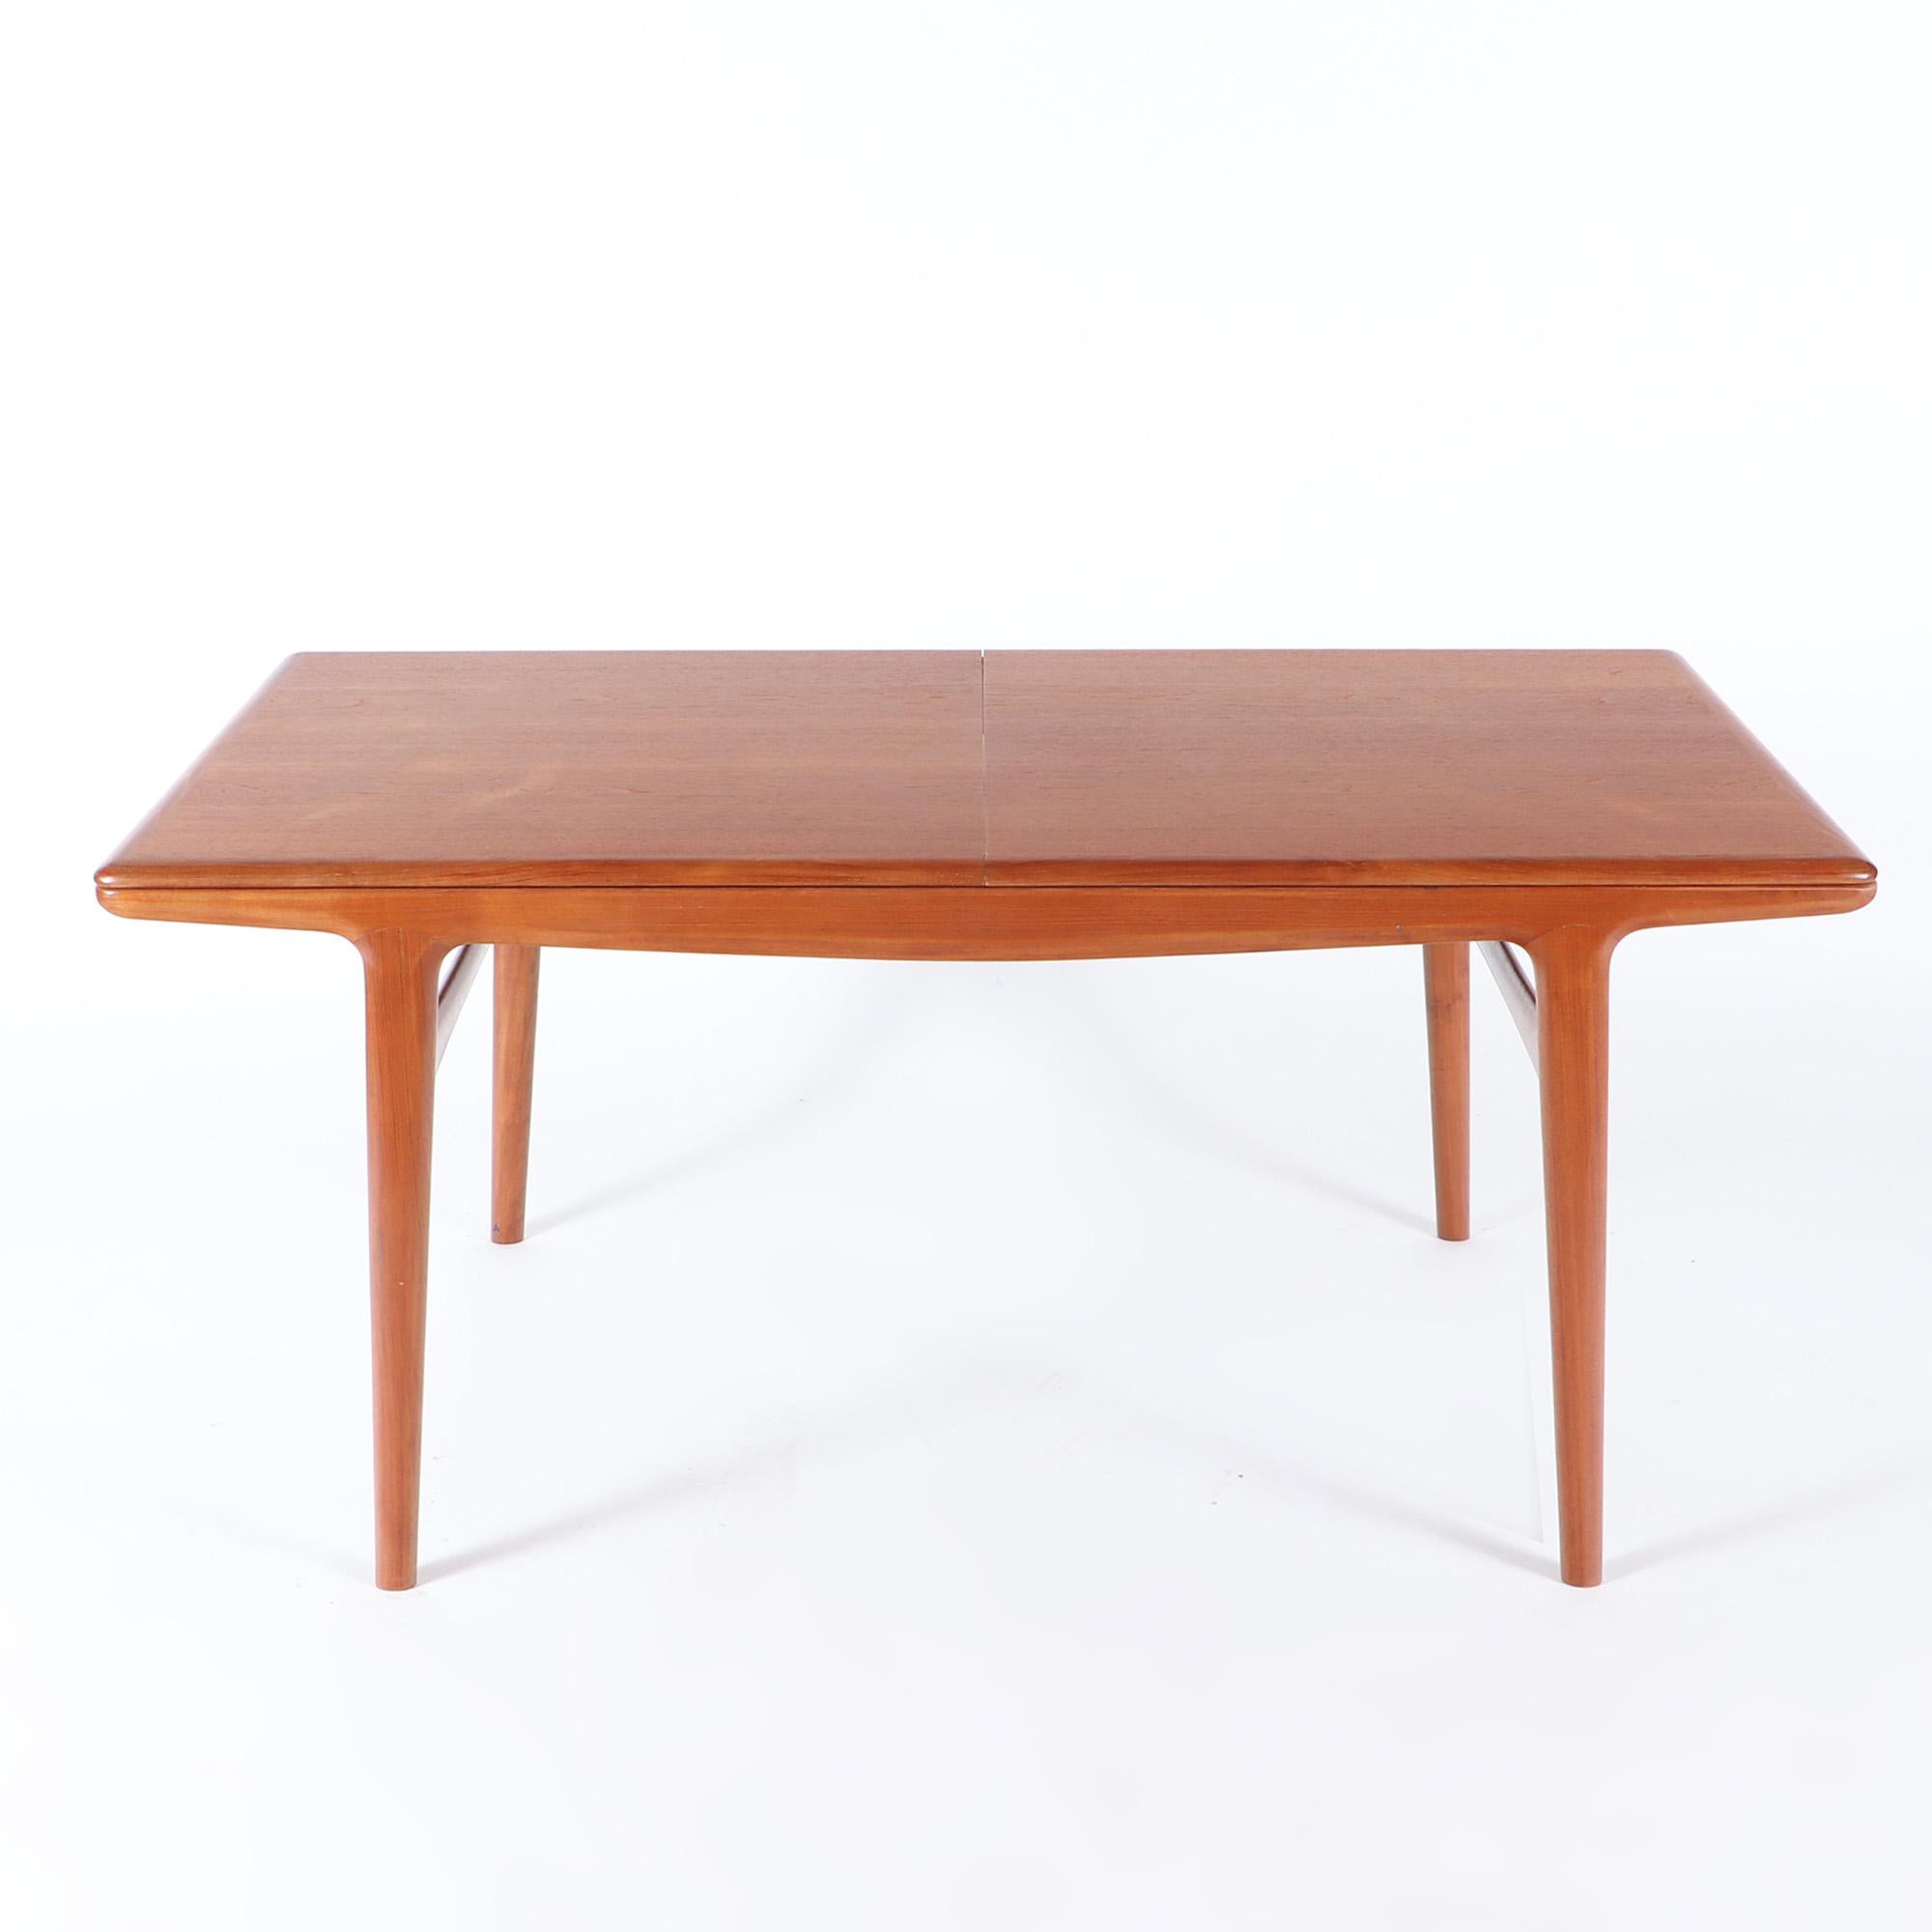 A Johannes Andersen mid century modern teak dining table with built in leaves circa 1960. Leaves measuring 17.75